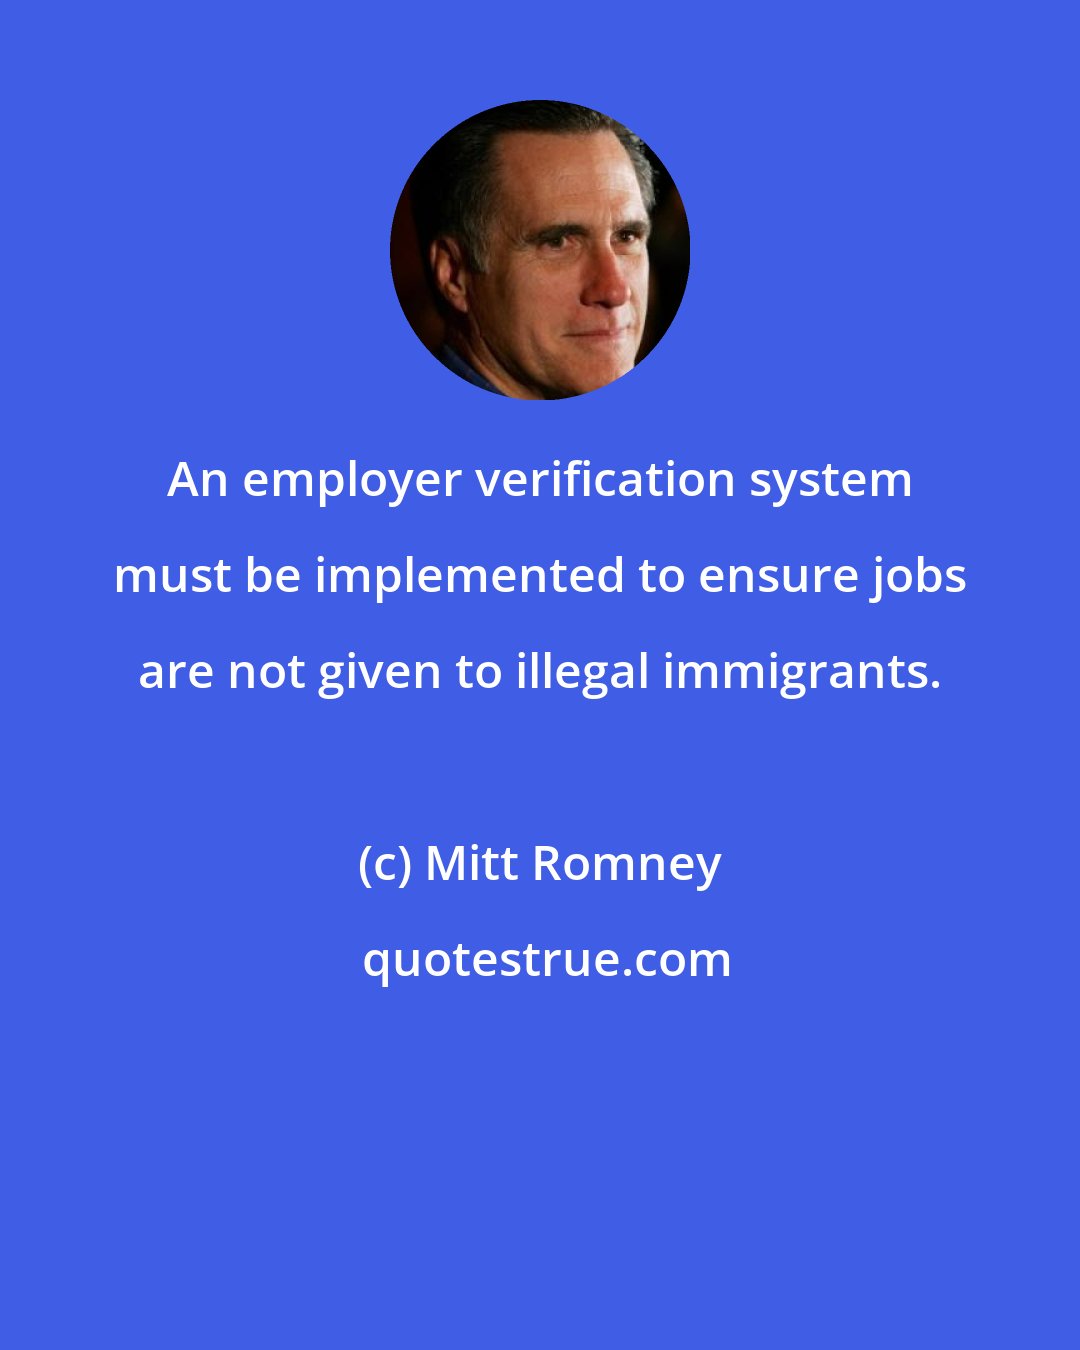 Mitt Romney: An employer verification system must be implemented to ensure jobs are not given to illegal immigrants.